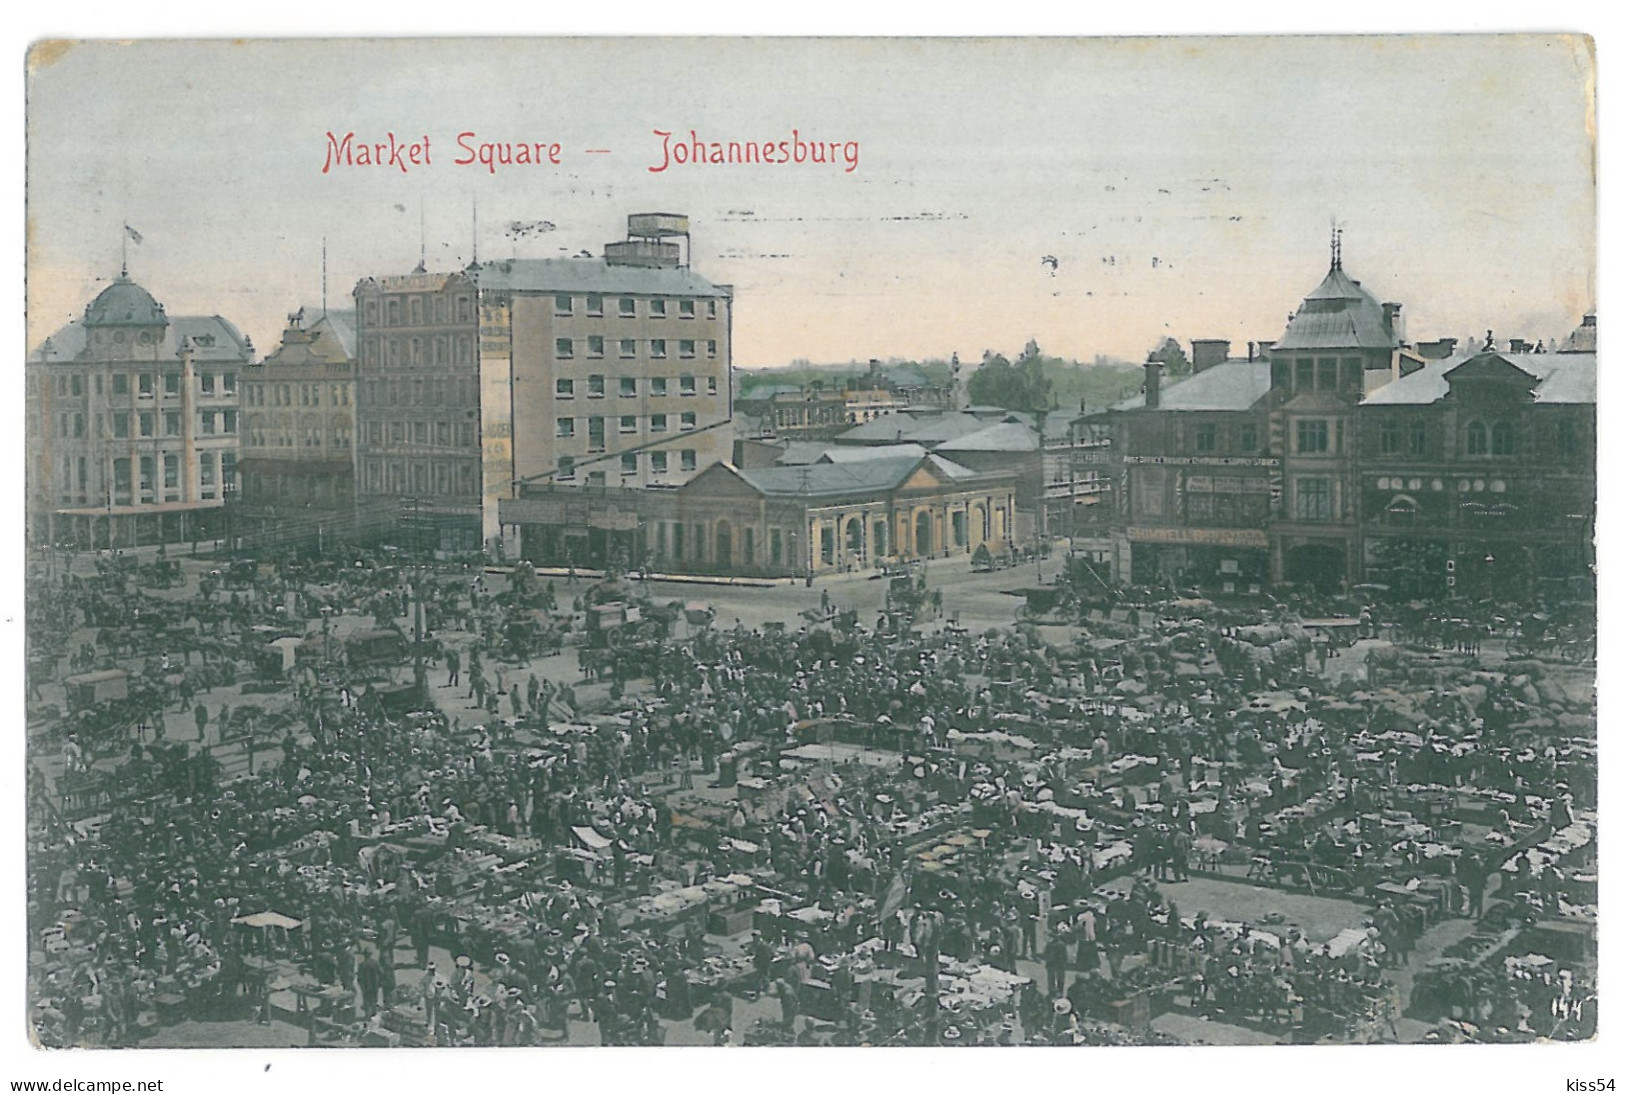 A 100 - 13806 JOHANNESBURG, Market - Old Postcard - Used - 1909 - South Africa